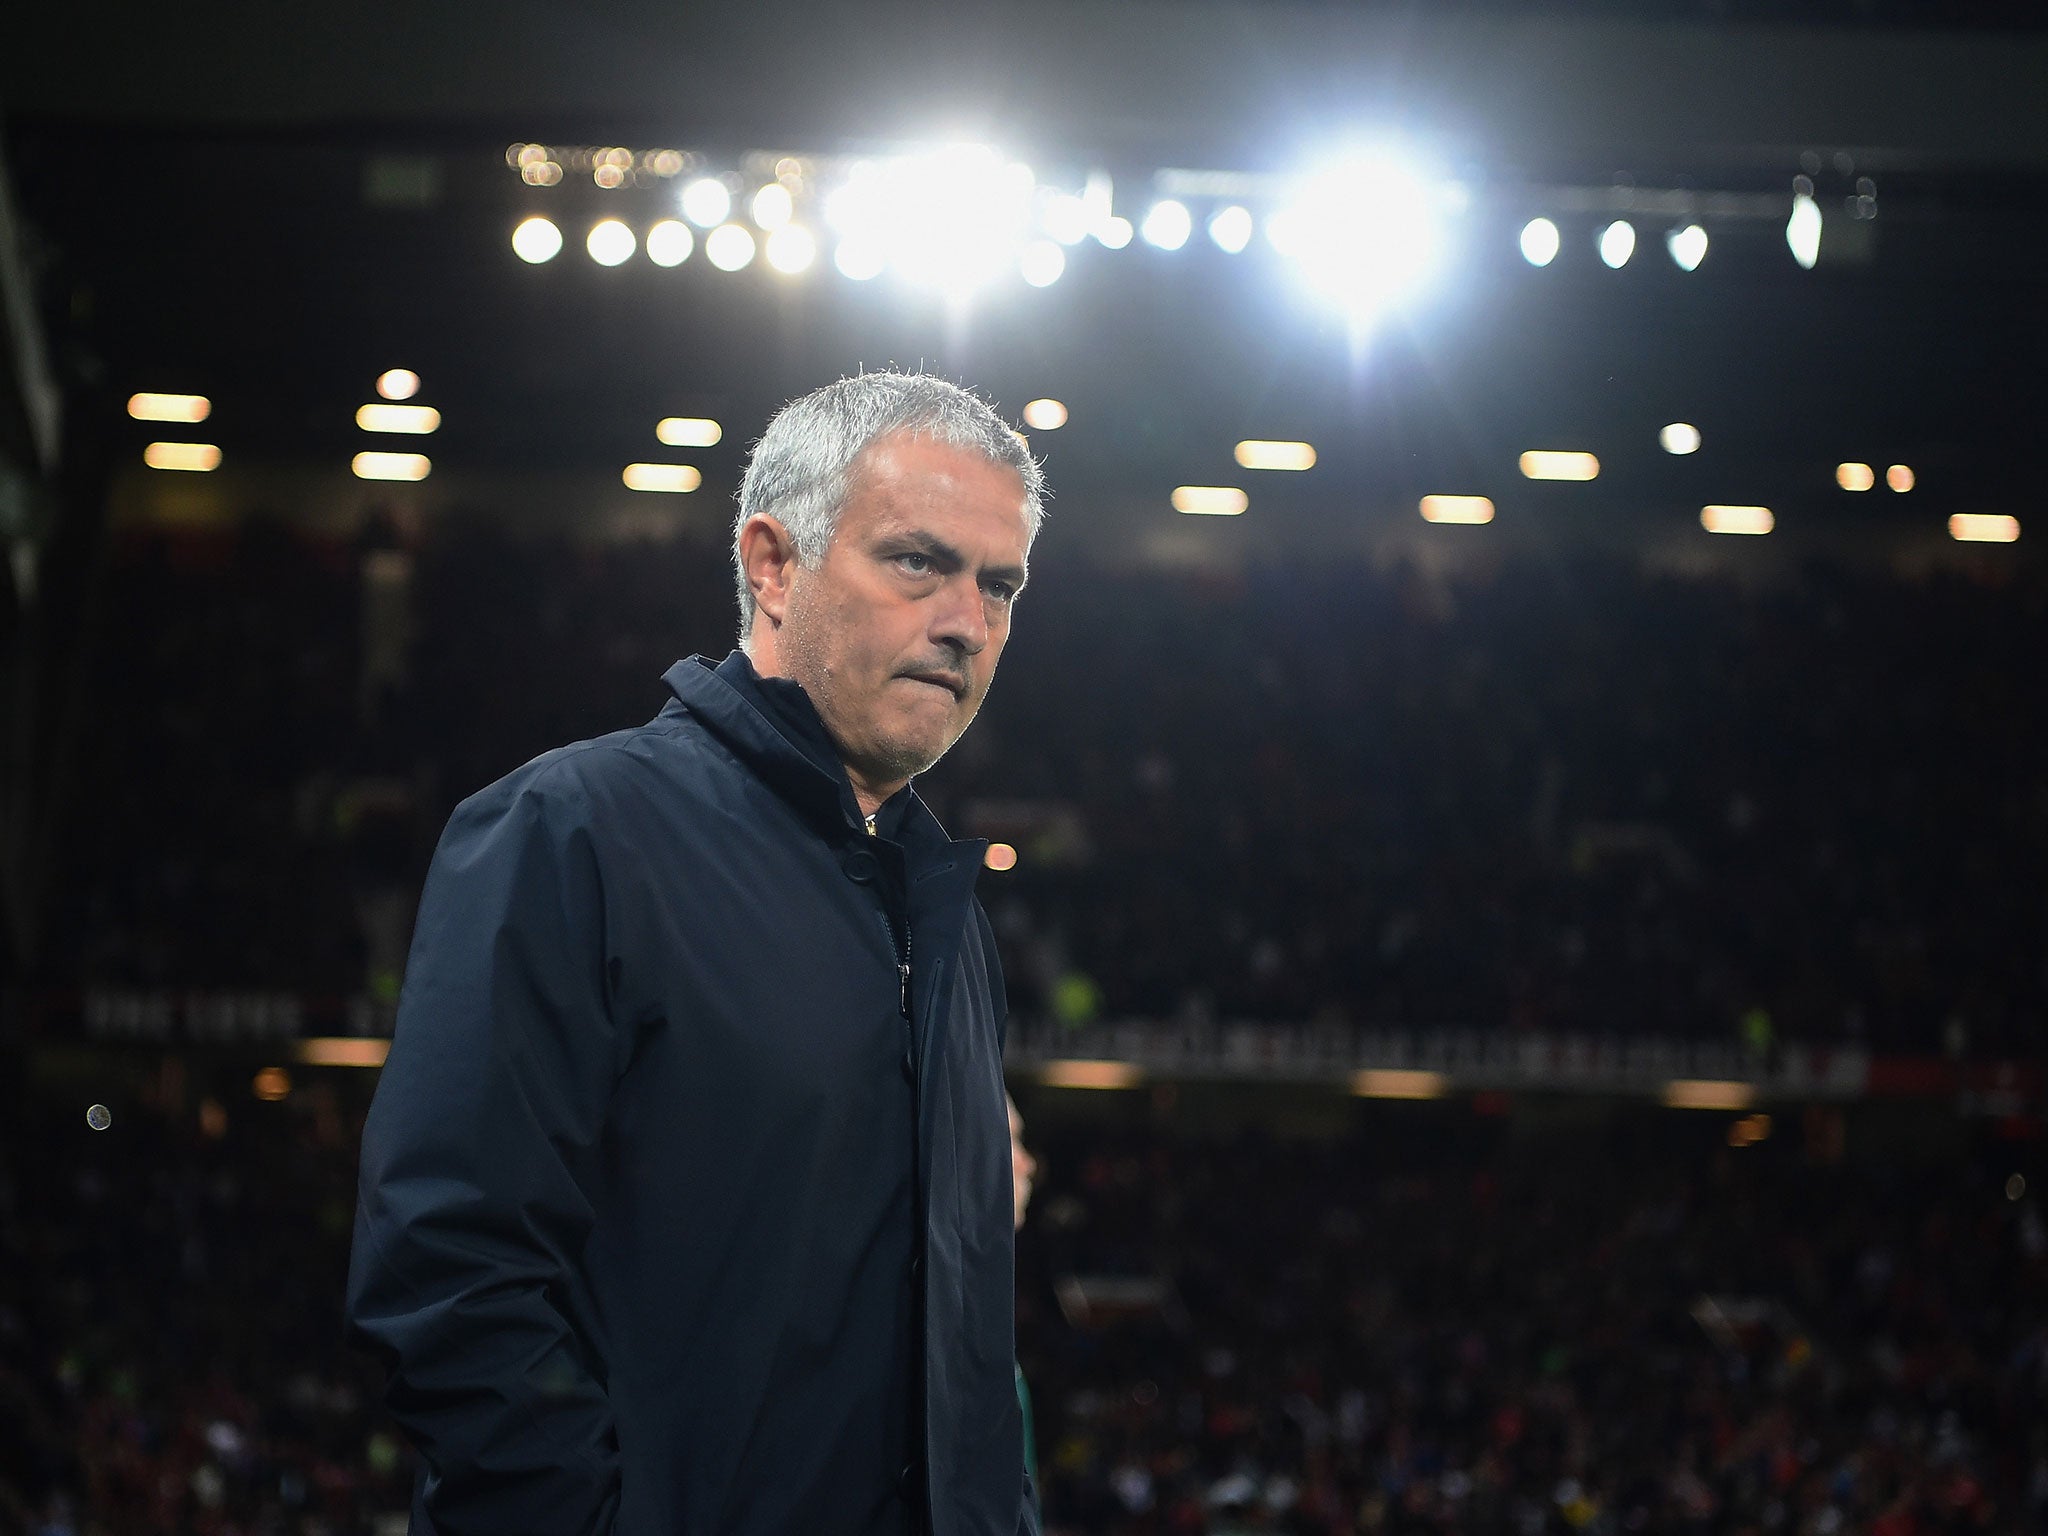 Jose Mourinho aired his concerns after Thursday's victory against Zorya Luhansk